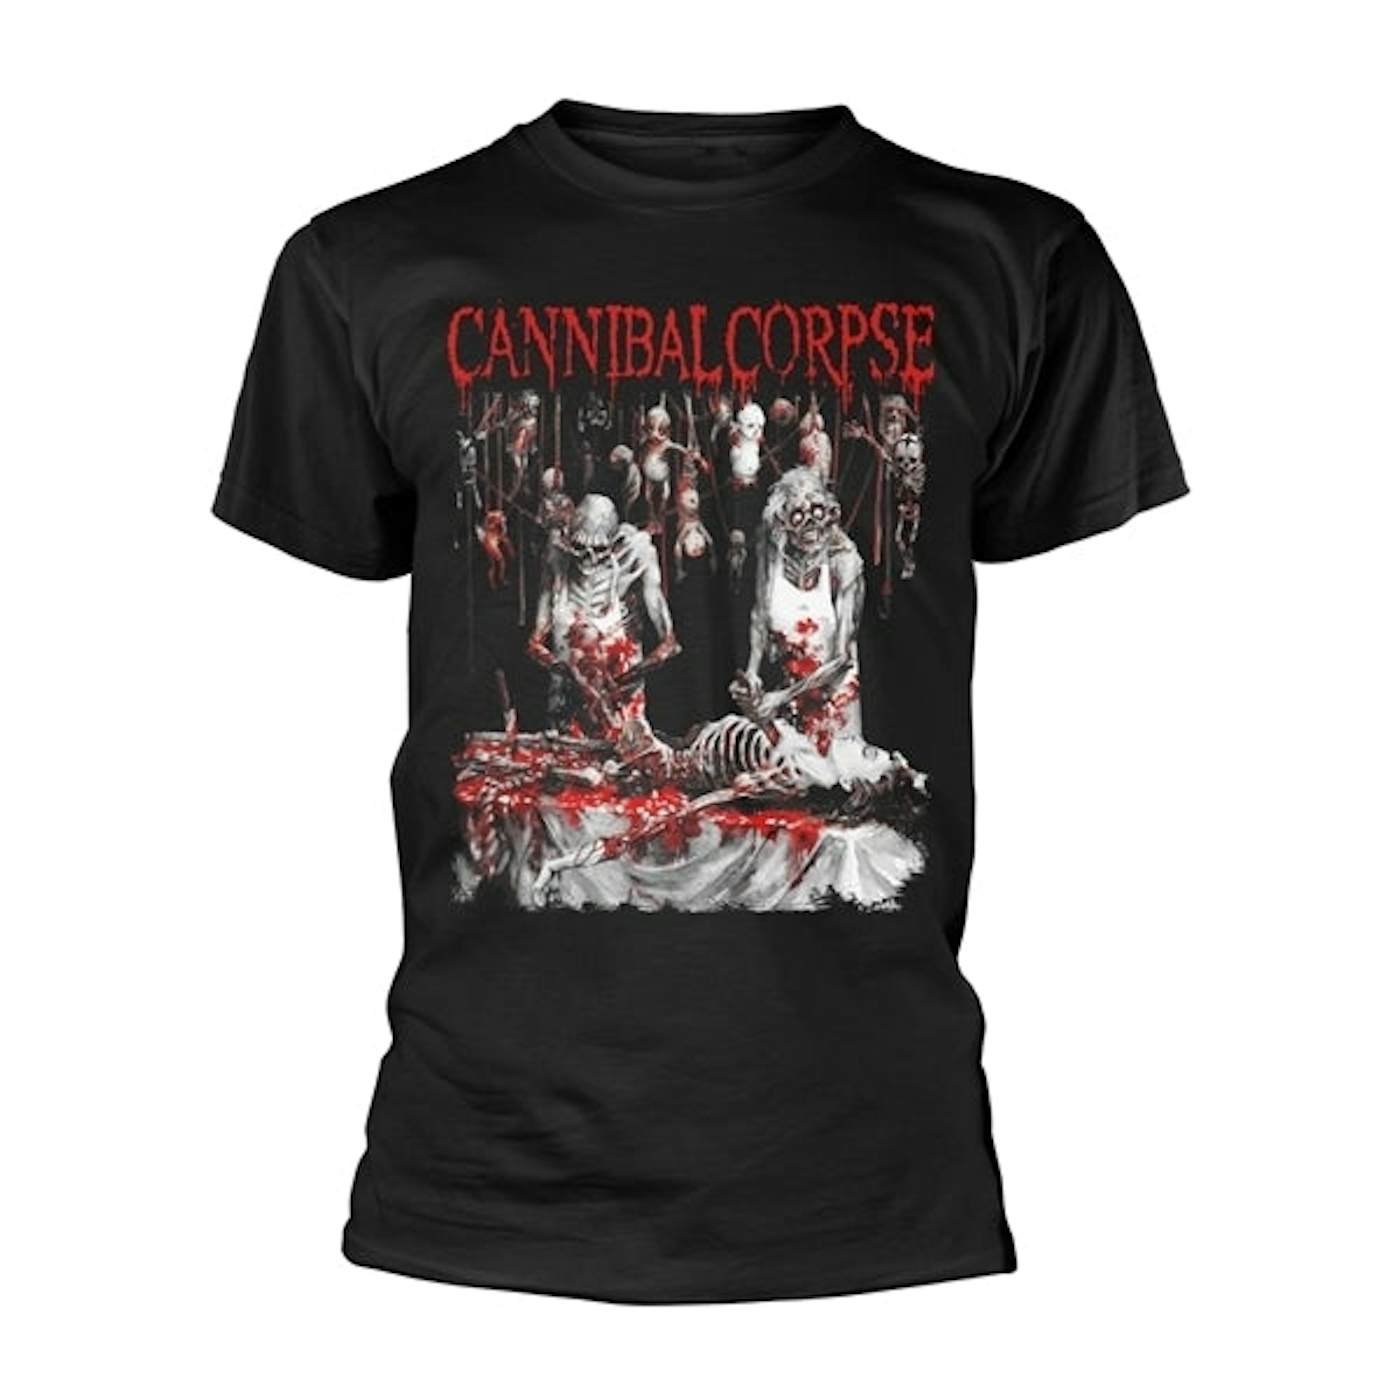 Cannibal Corpse T-Shirt - Butchered At Birth (Explicit)